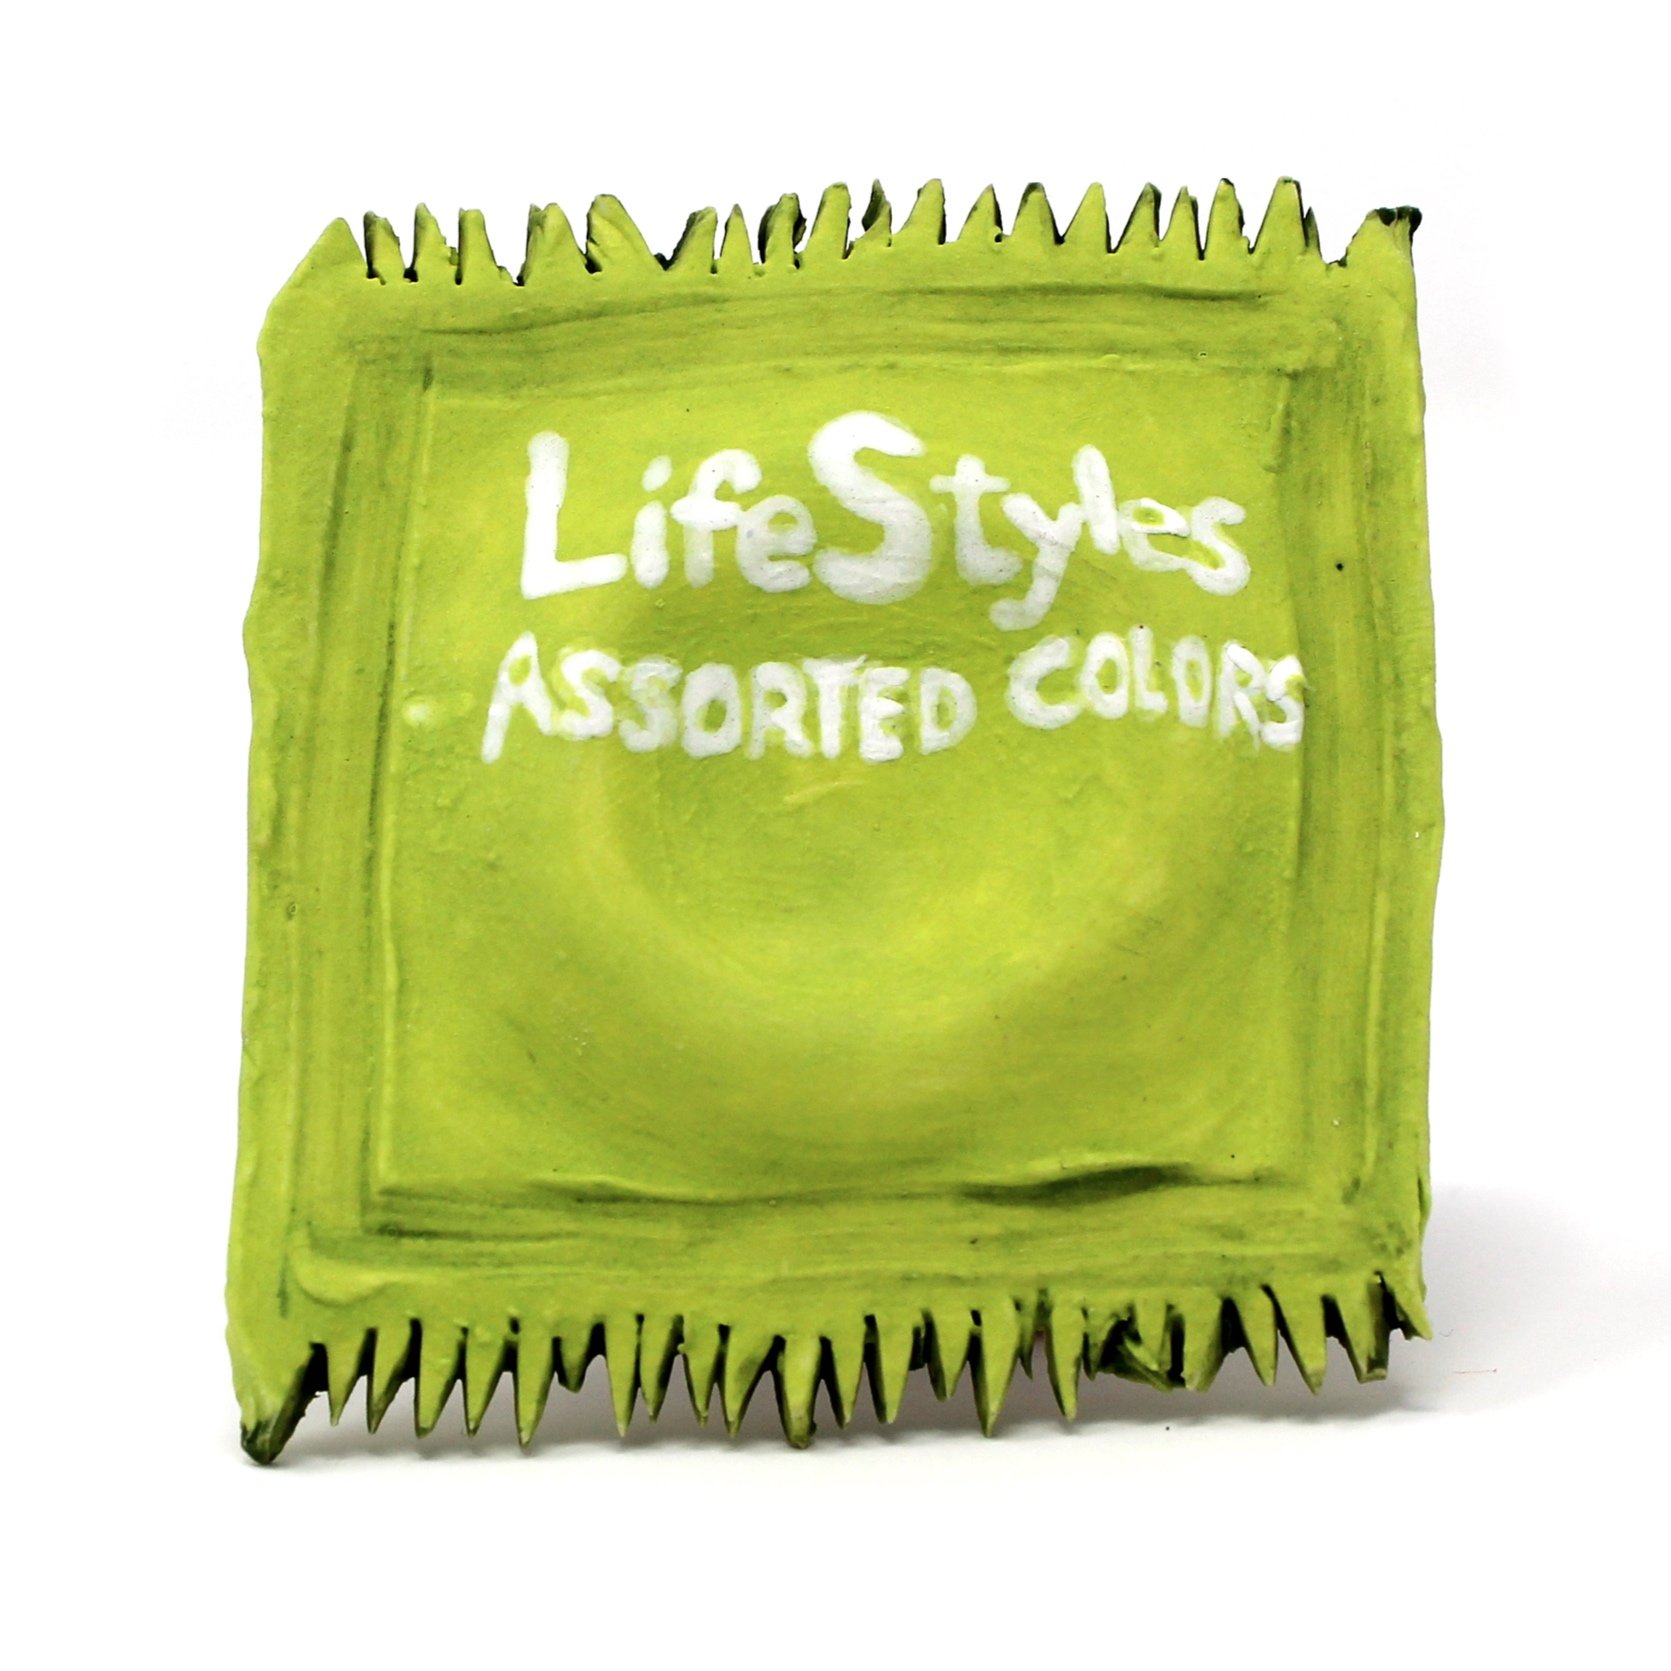 Lifestyles Assorted Colors (Chartreuse) Condom